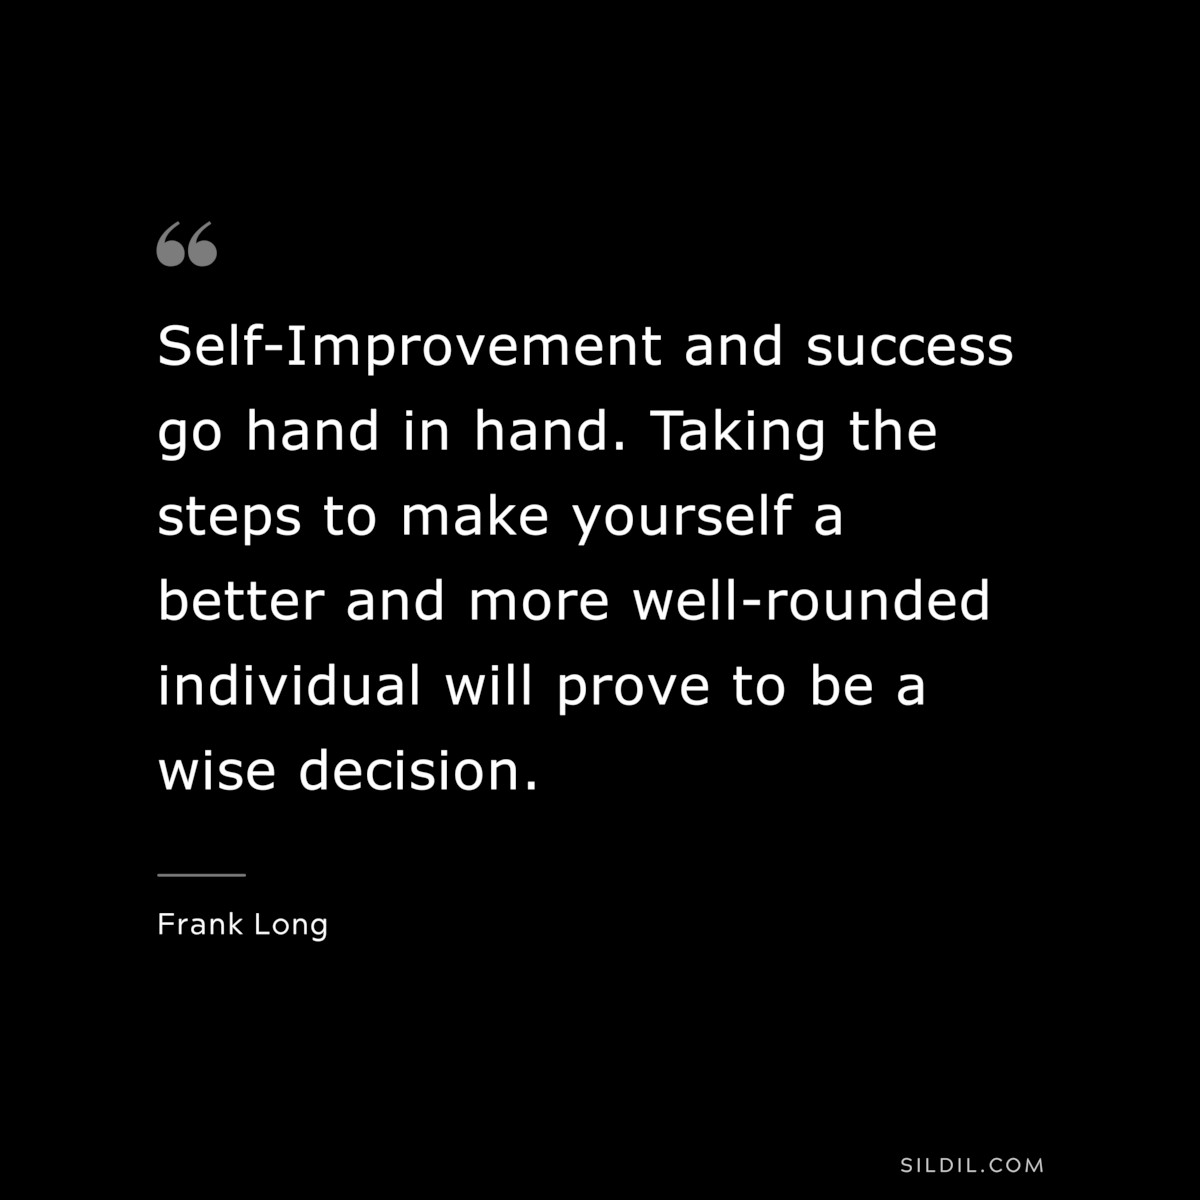 Self-Improvement and success go hand in hand. Taking the steps to make yourself a better and more well-rounded individual will prove to be a wise decision. ― Frank Long